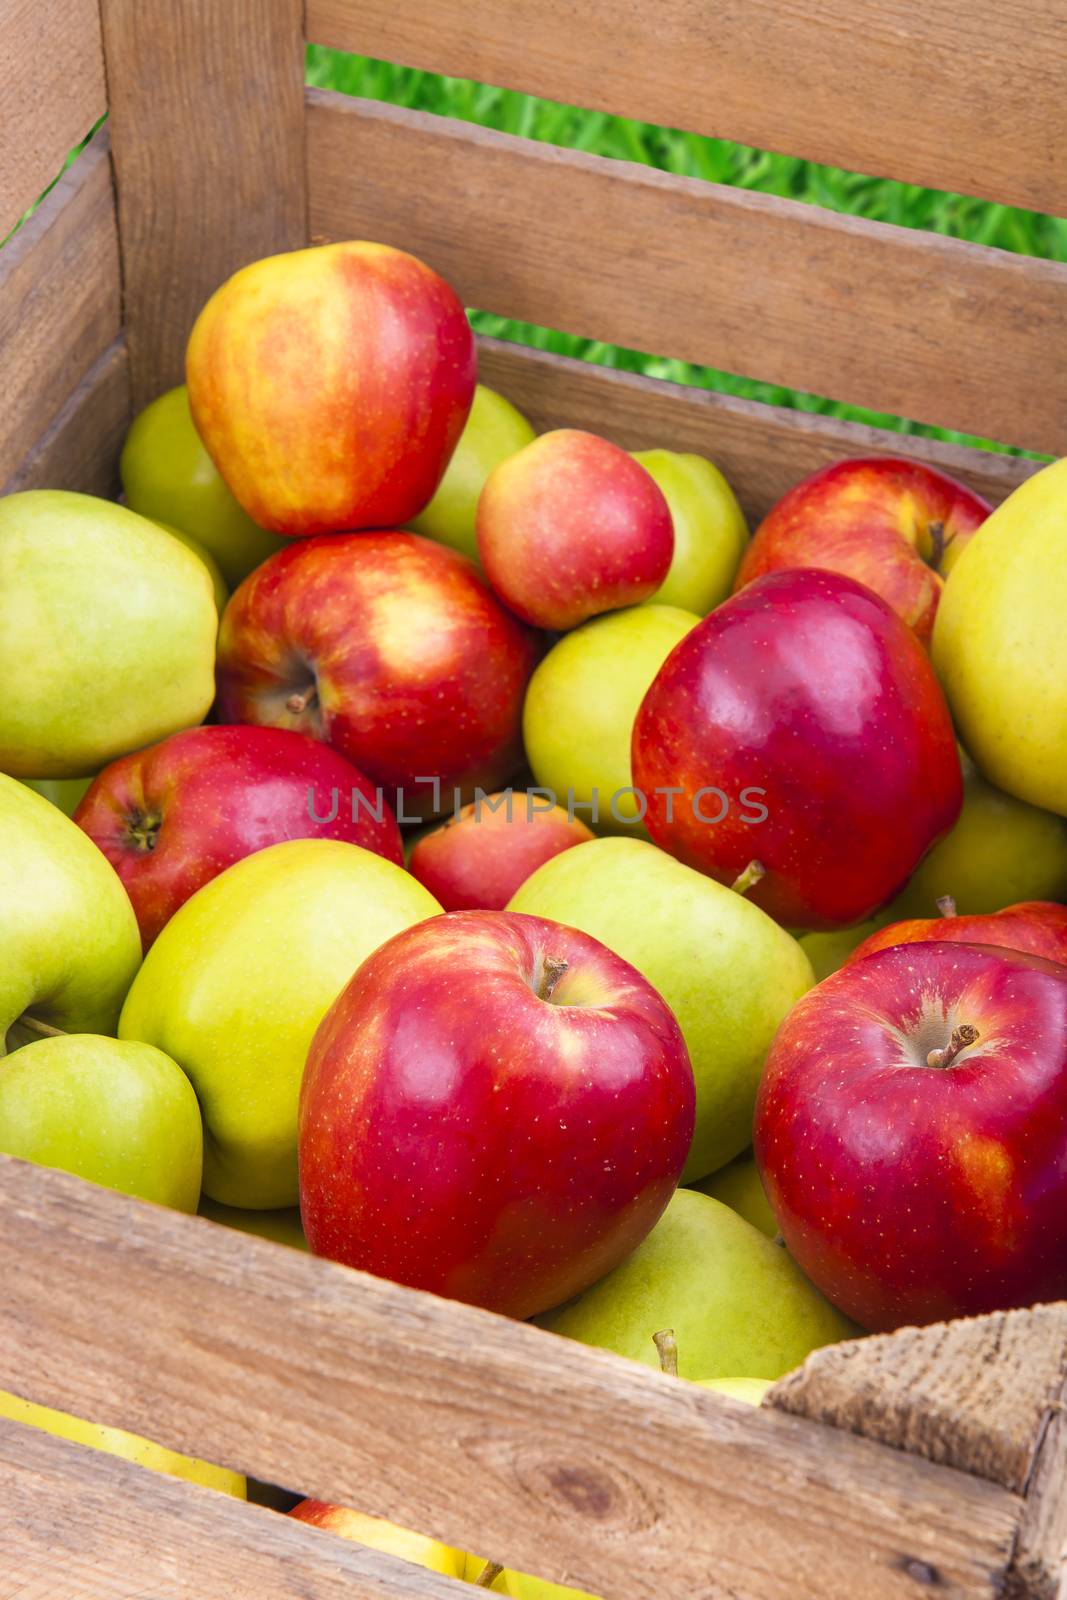 Green and red apples in a wooden box, fresh fruits